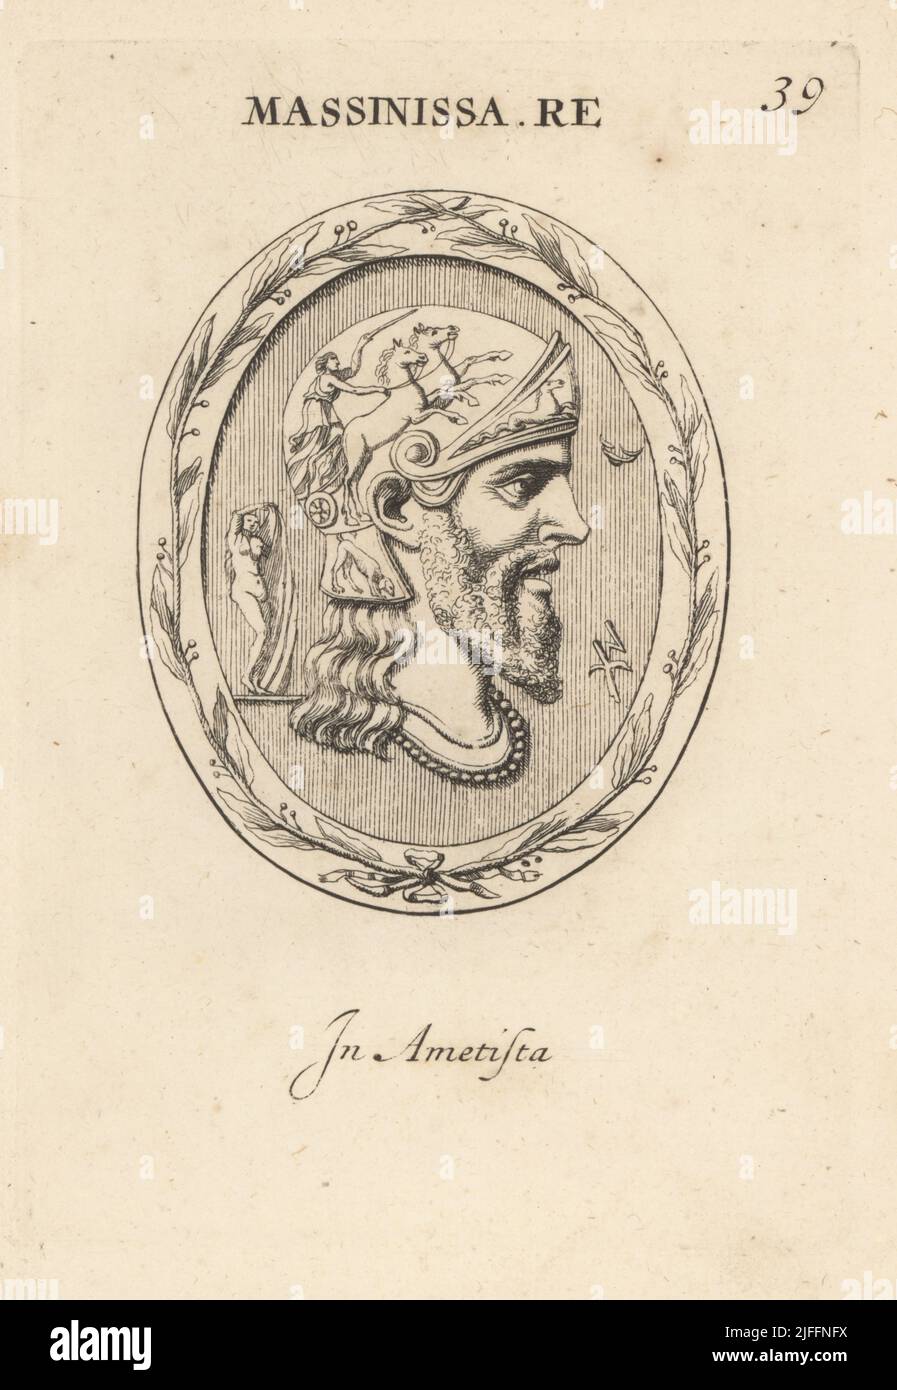 Bust of King Masinissa, c. 238 BC – 148 BC, ancient Numidian leader of Massylii Berber tribes during the Second Punic War. In helmet with biga war chariot. In amethyst. Massinissa Re. In Ametista. Copperplate engraving by Giovanni Battista Galestruzzi after Leonardo Agostini from Gemmae et Sculpturae Antiquae Depicti ab Leonardo Augustino Senesi, Abraham Blooteling, Amsterdam, 1685. Stock Photo